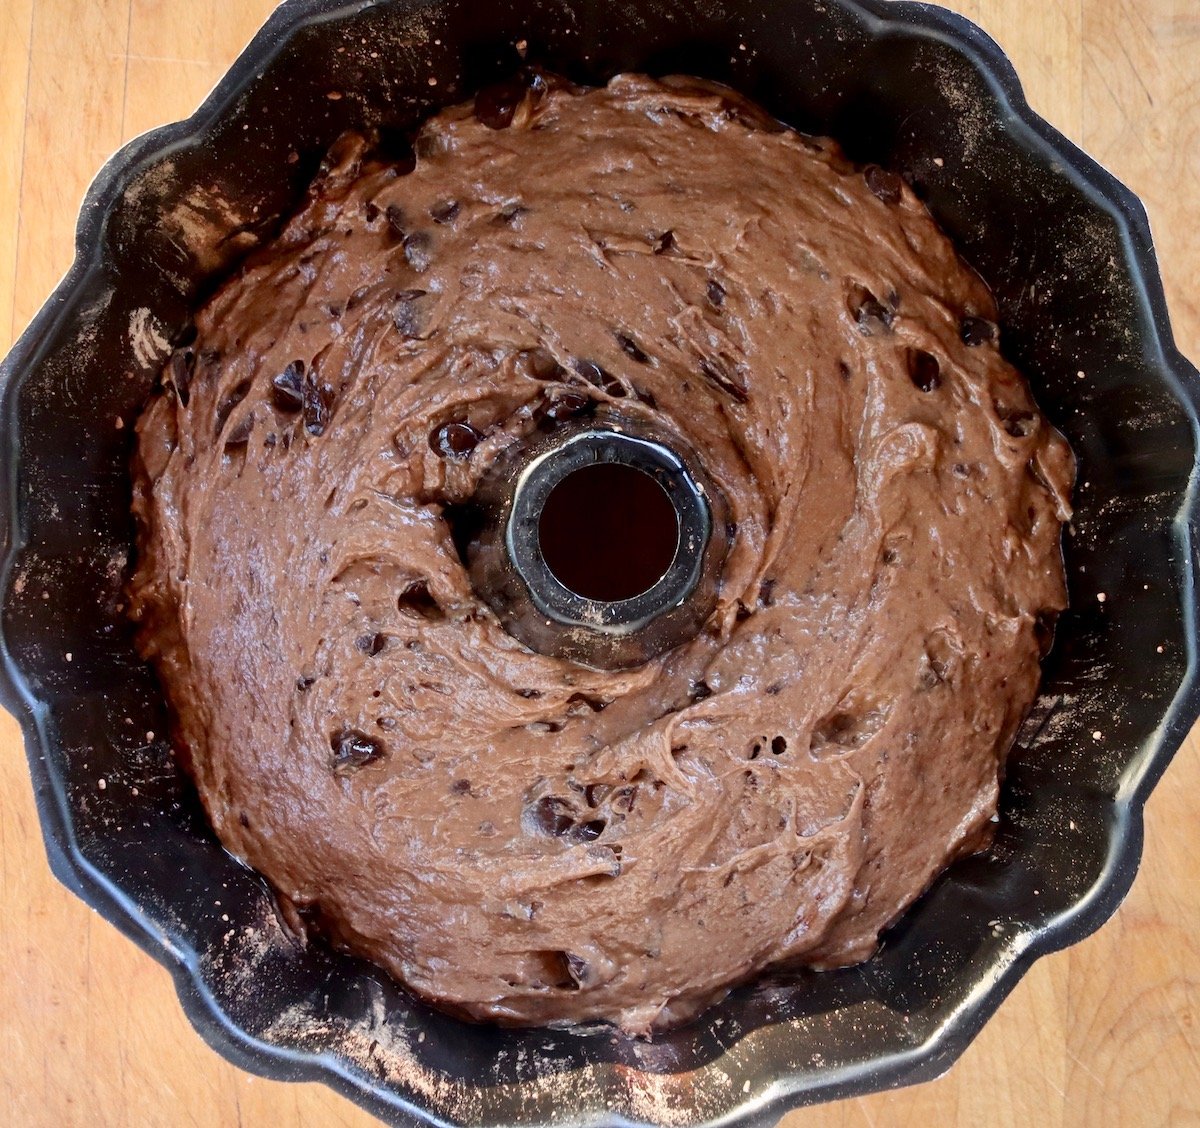 Bundt pan filled with chocolate chip cake batter.